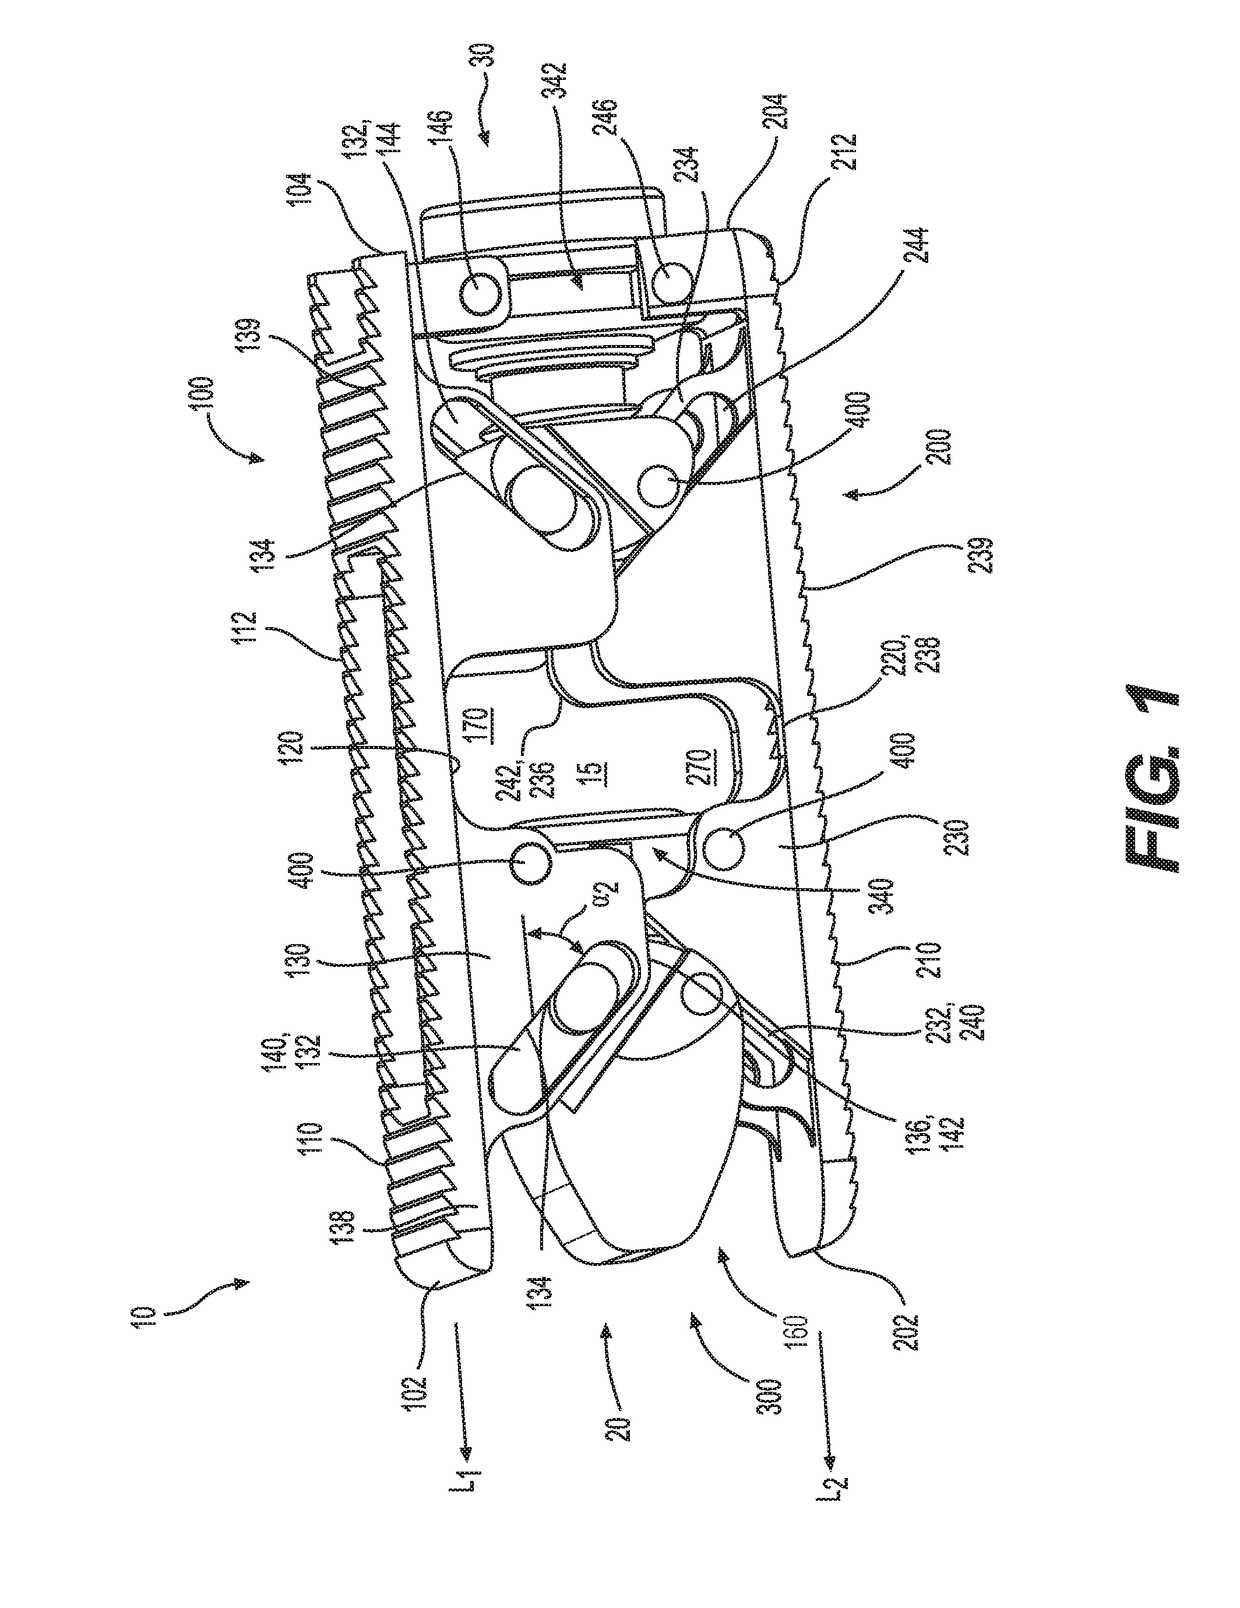 Expandable, adjustable inter-body fusion devices and methods